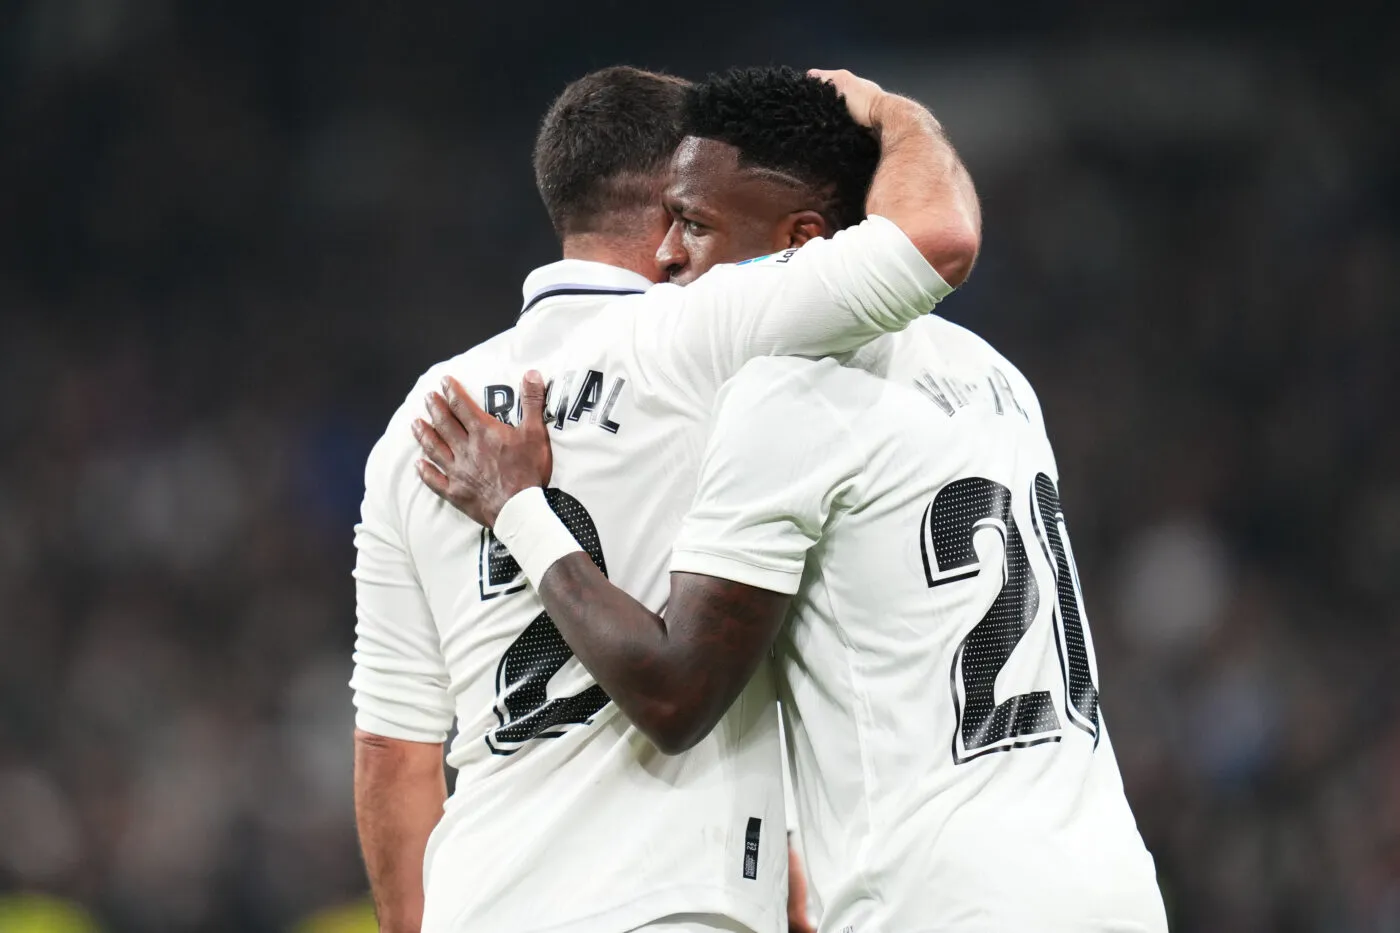  Dani Carvajal and Vinicius Junior celebrate a goal during the 2022 UEFA Champions League final between Real Madrid and Liverpool at the Stade de France in Saint-Denis, France.